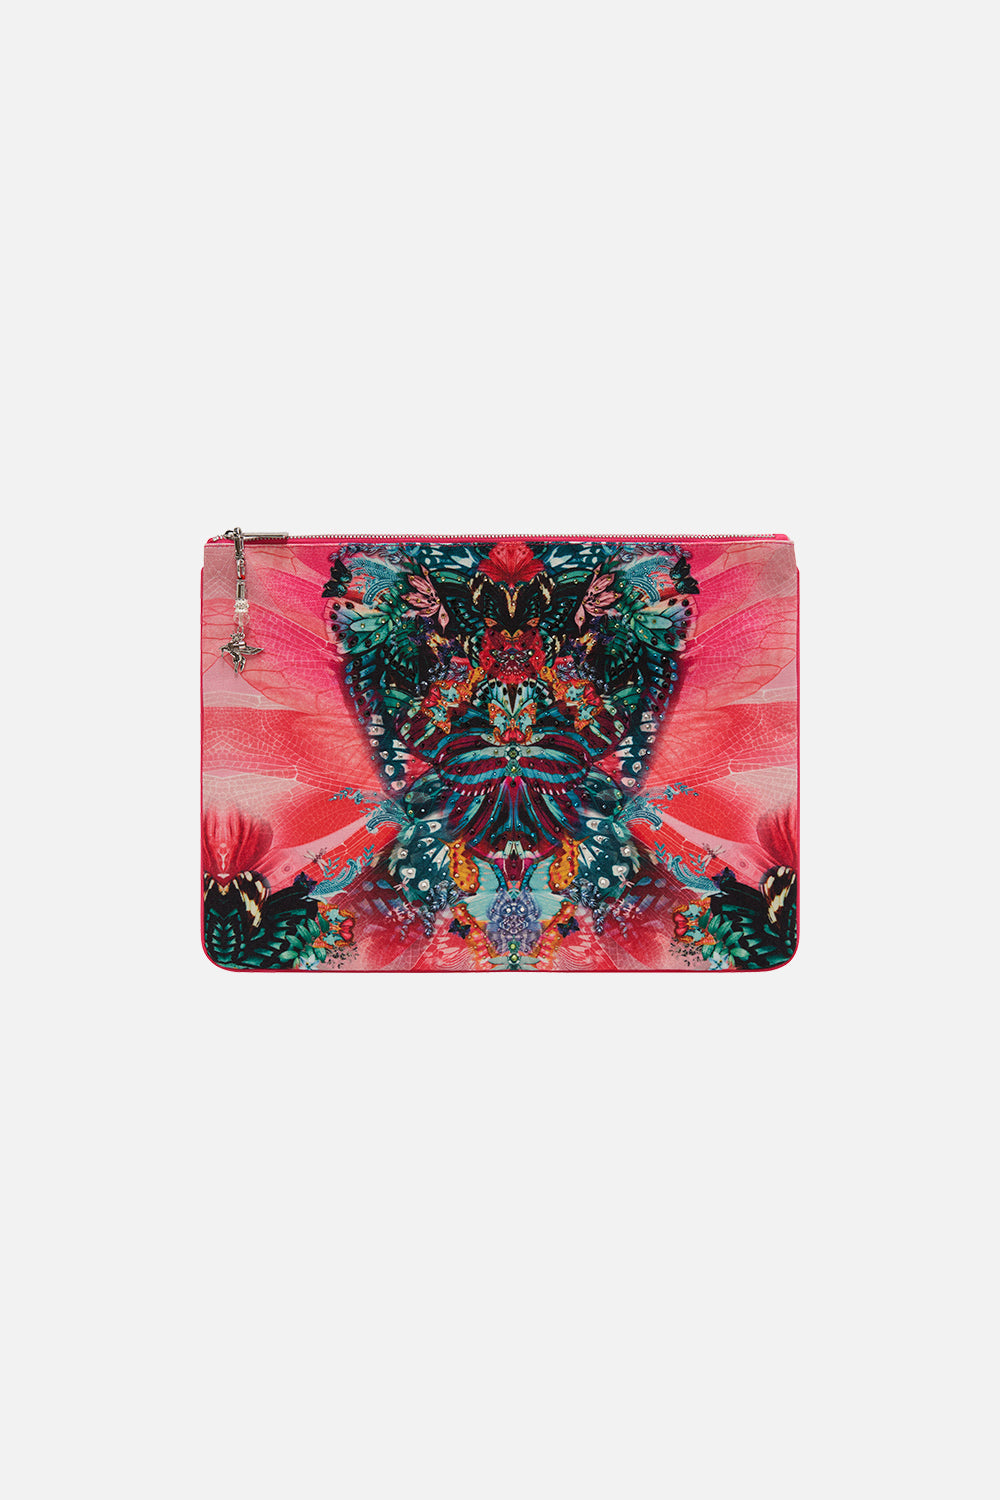 LARGE CANVAS CLUTCH IN A FLUTTER